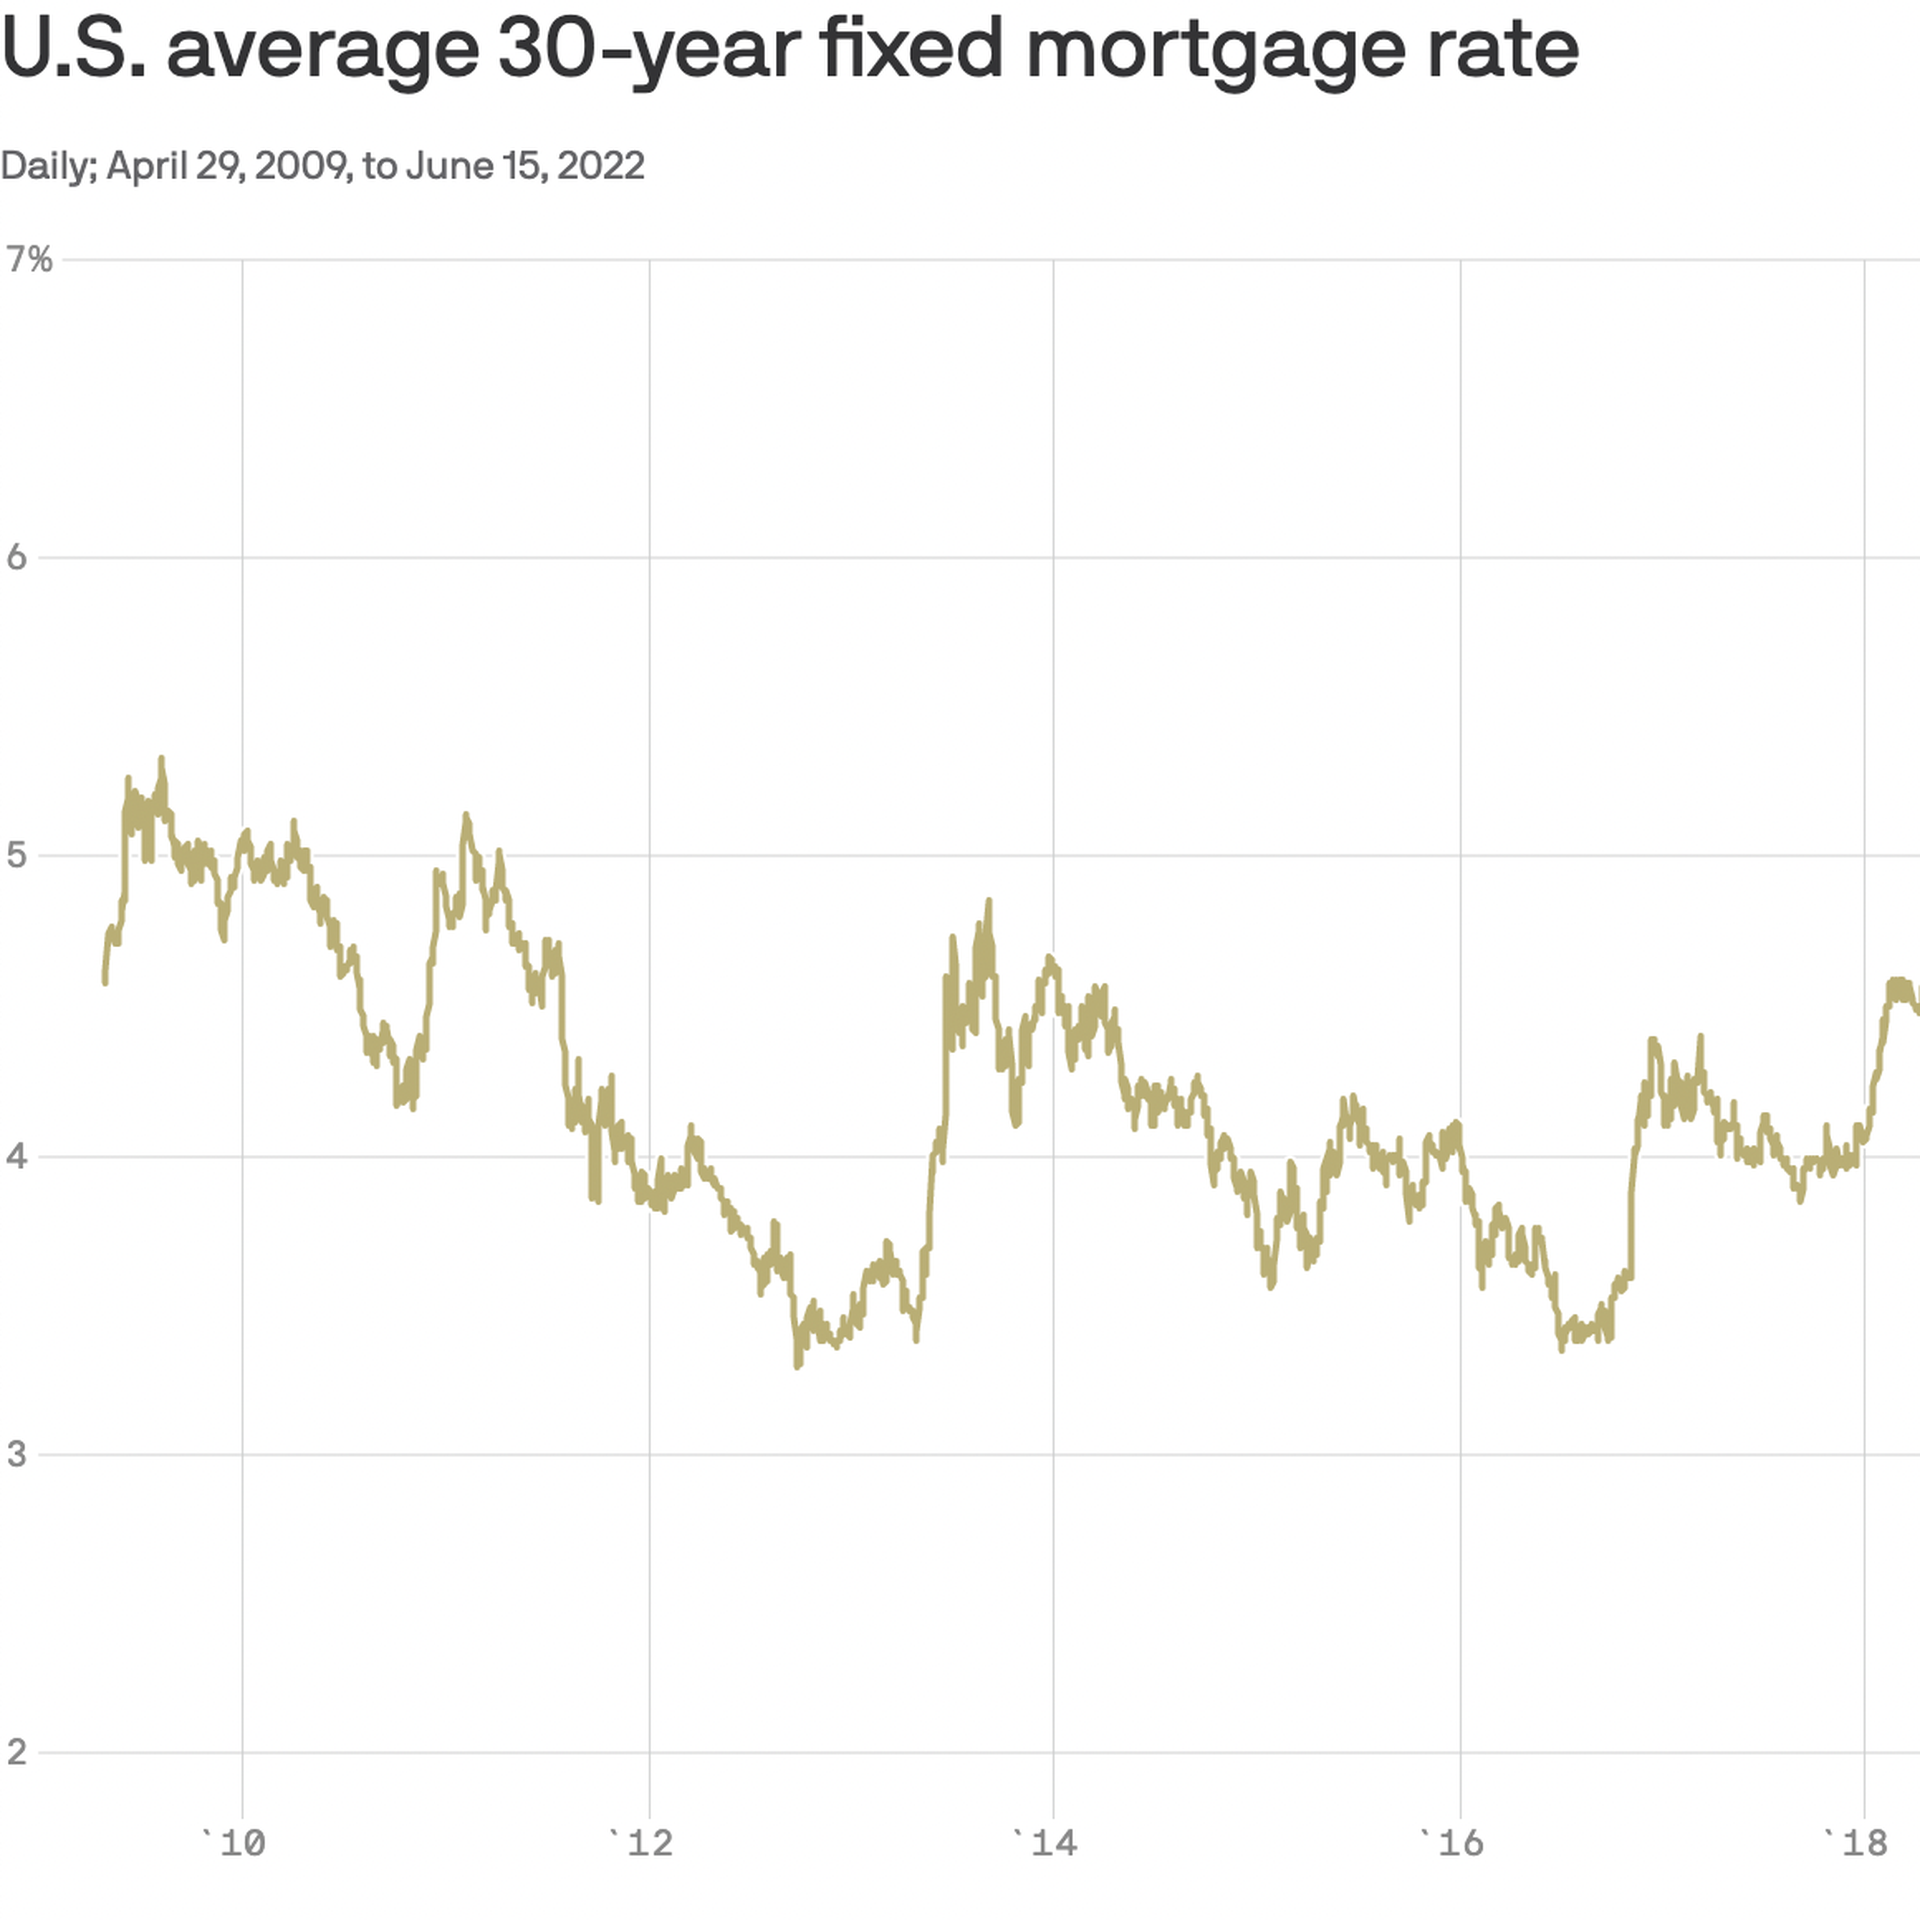 A chart showing U.S. average 30-year fixed mortgage rate